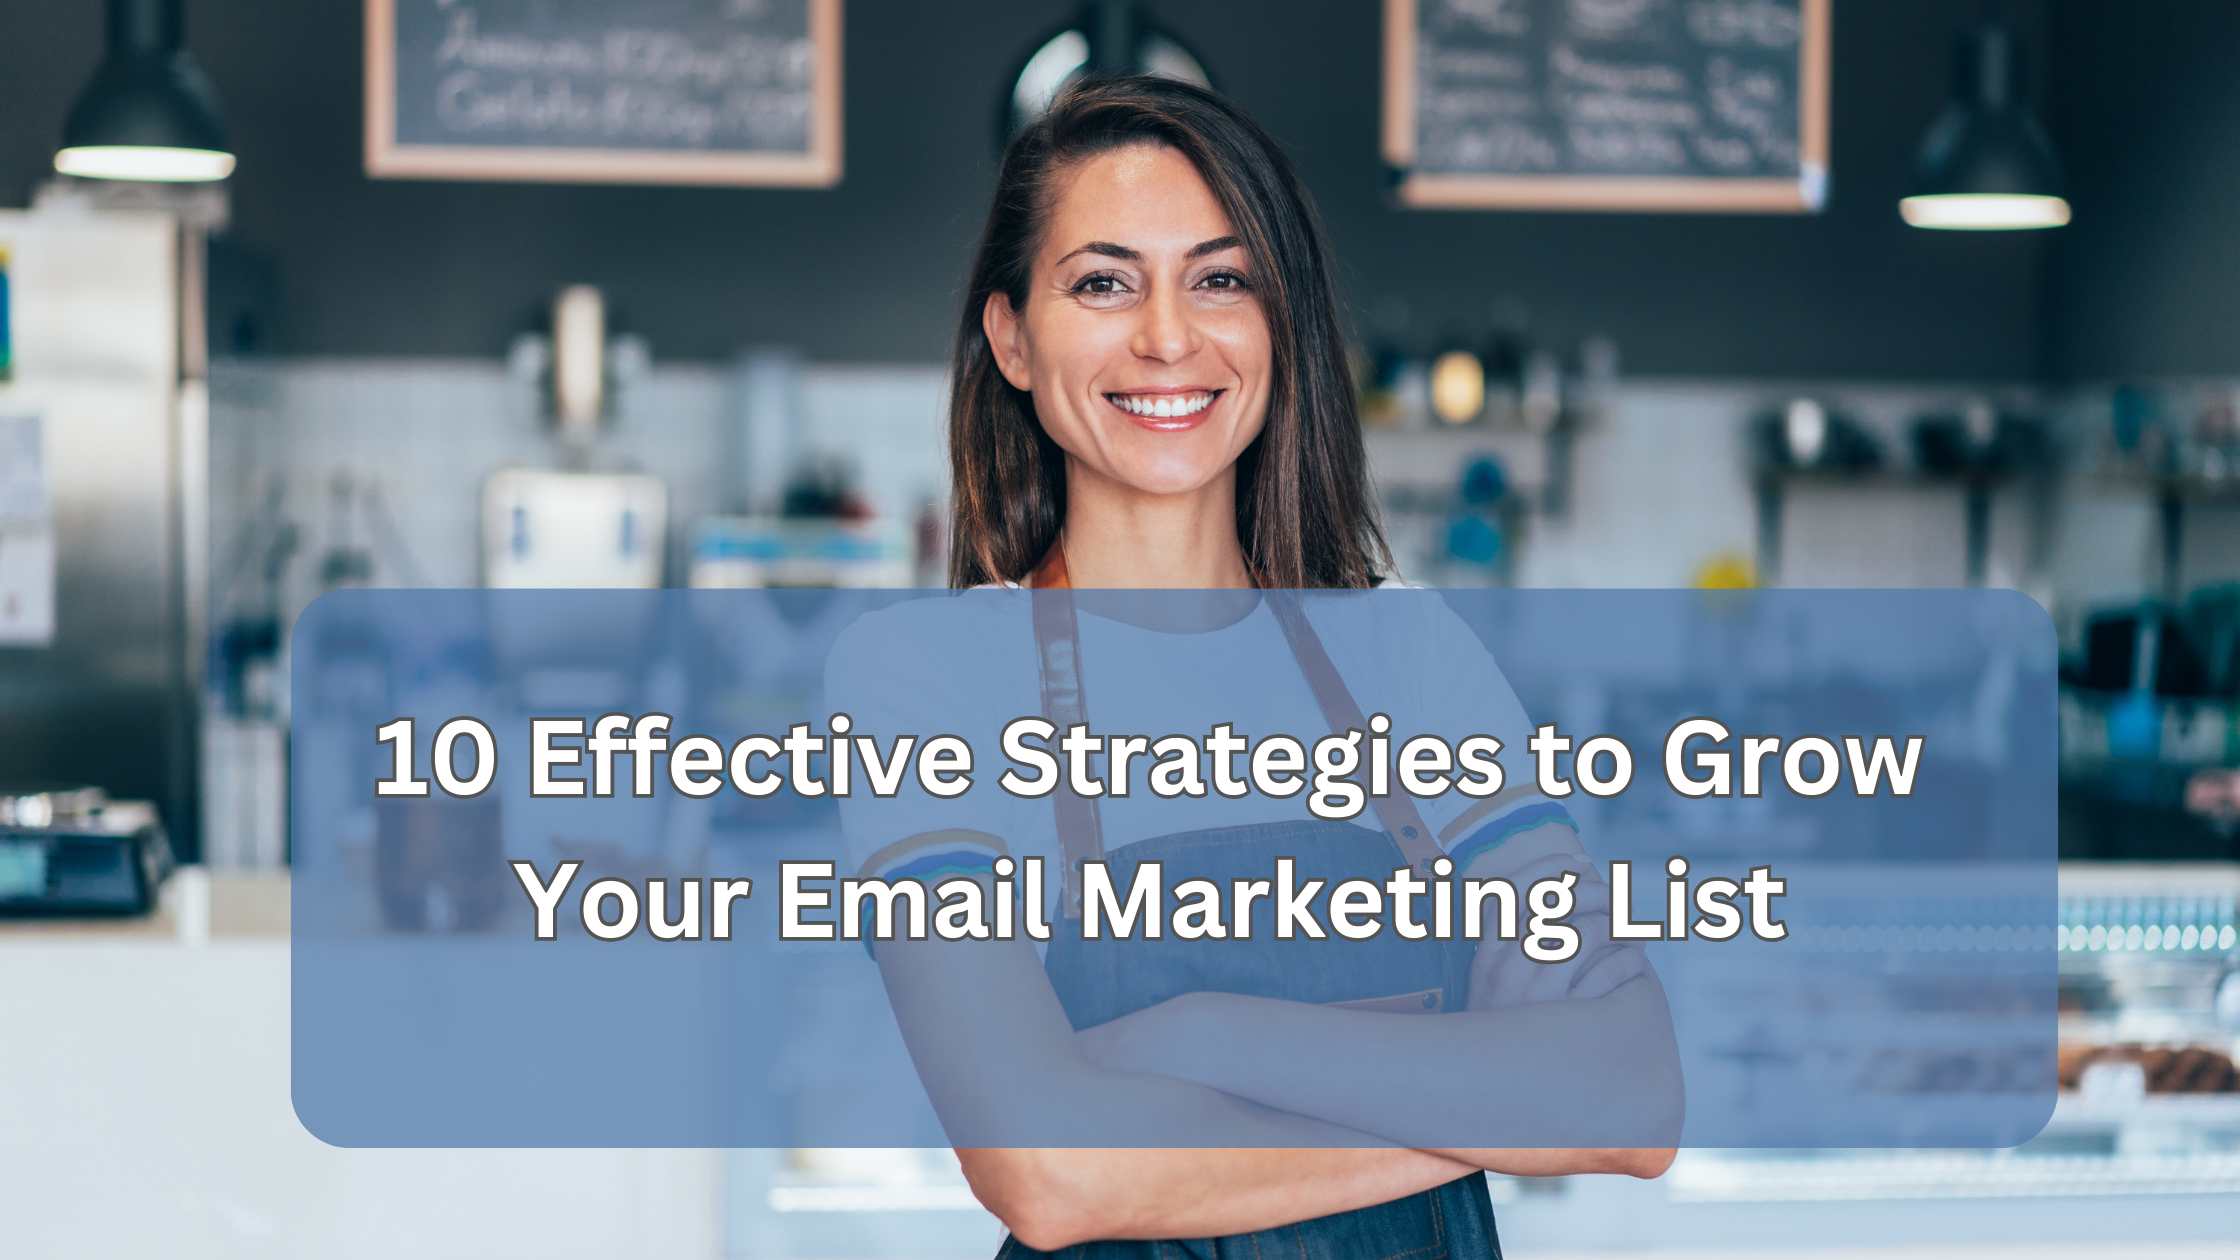 10 Effective Strategies to Grow Your Email Marketing List